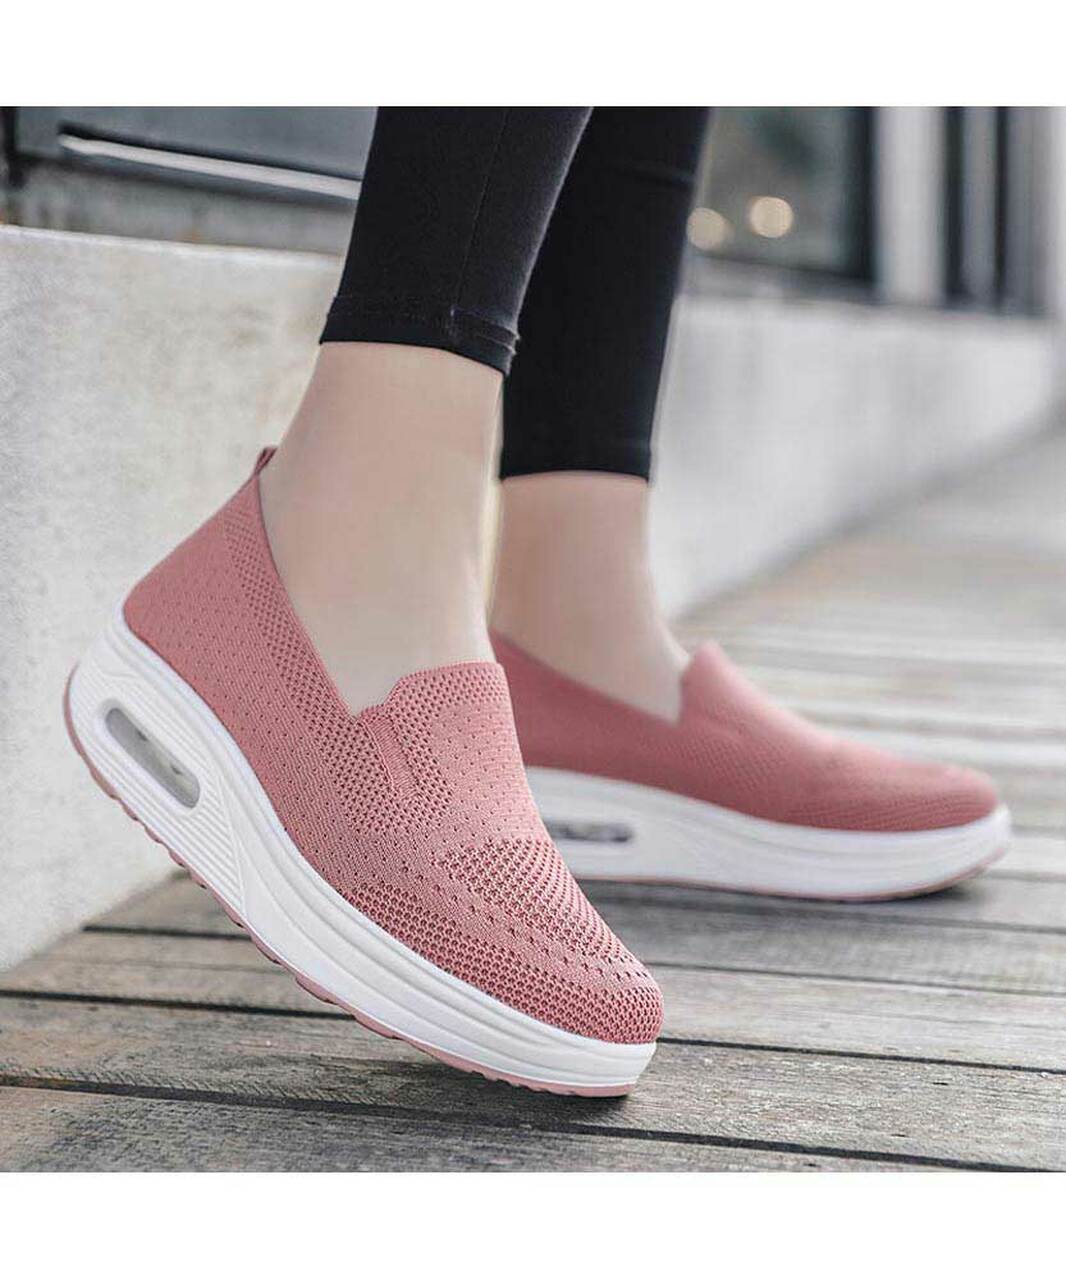 WOMEN'S ORTHOPEDIC ARCH-SUPPORT SNEAKERS 2023 – 🇦🇺 BY LUNAS AUSTRALIA 🇦🇺